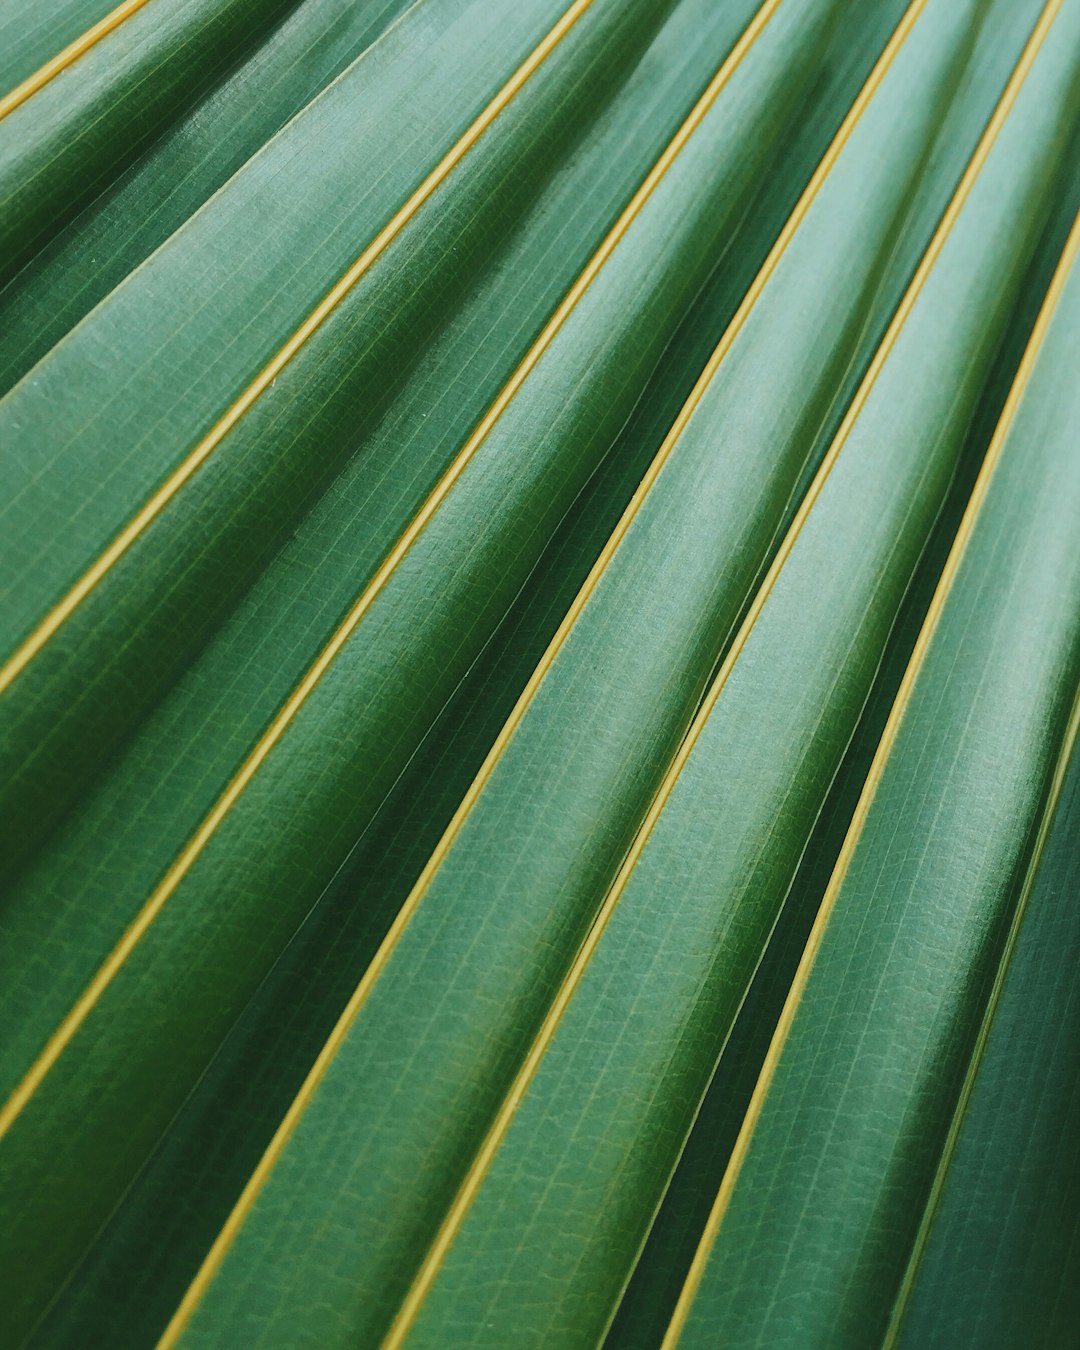 ivory coast, tropical forest, coconut leaf